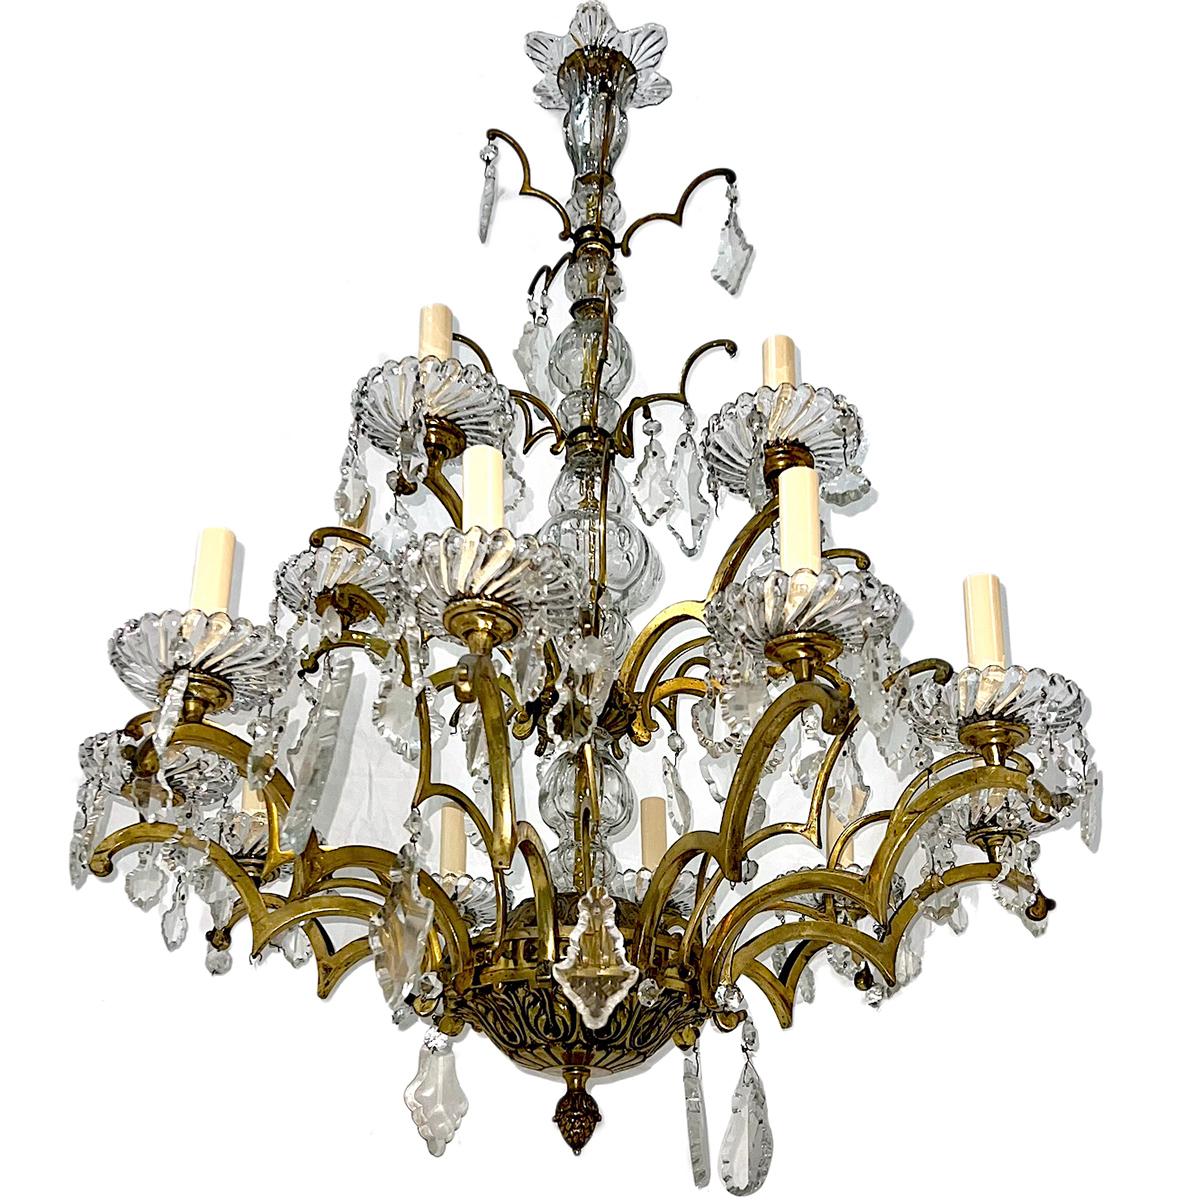 A circa 1900 French bronze chandelier with 15 lights and with crystal pendants.

Measurements:
Diameter: 29